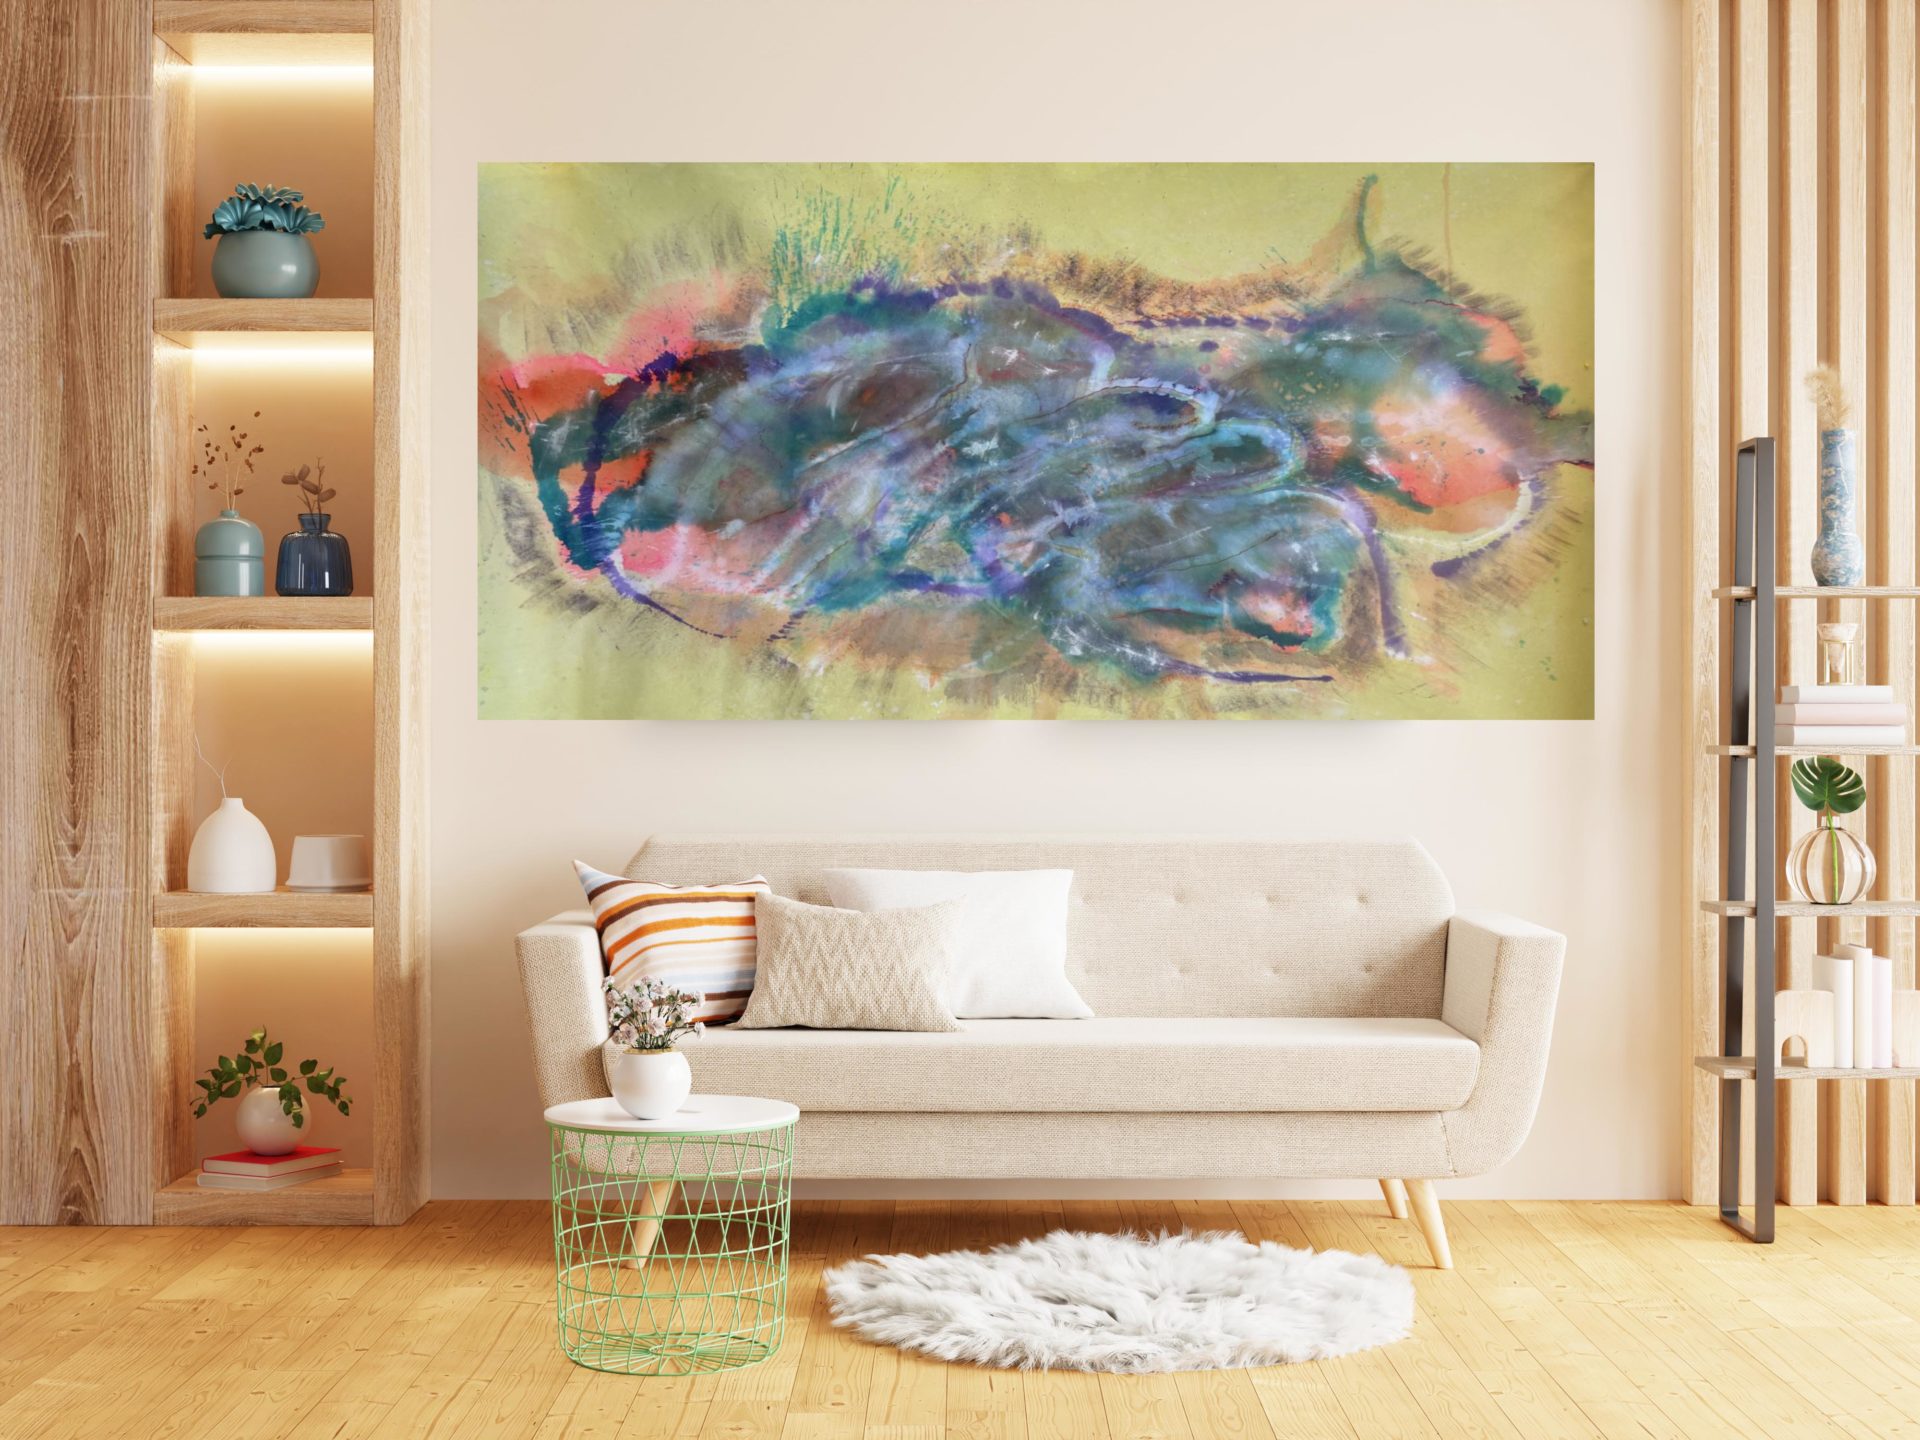 Large abstact wallart for sale  UK  5fy x 7ft huge oriigianl abstract art colourful large abstract piece of art